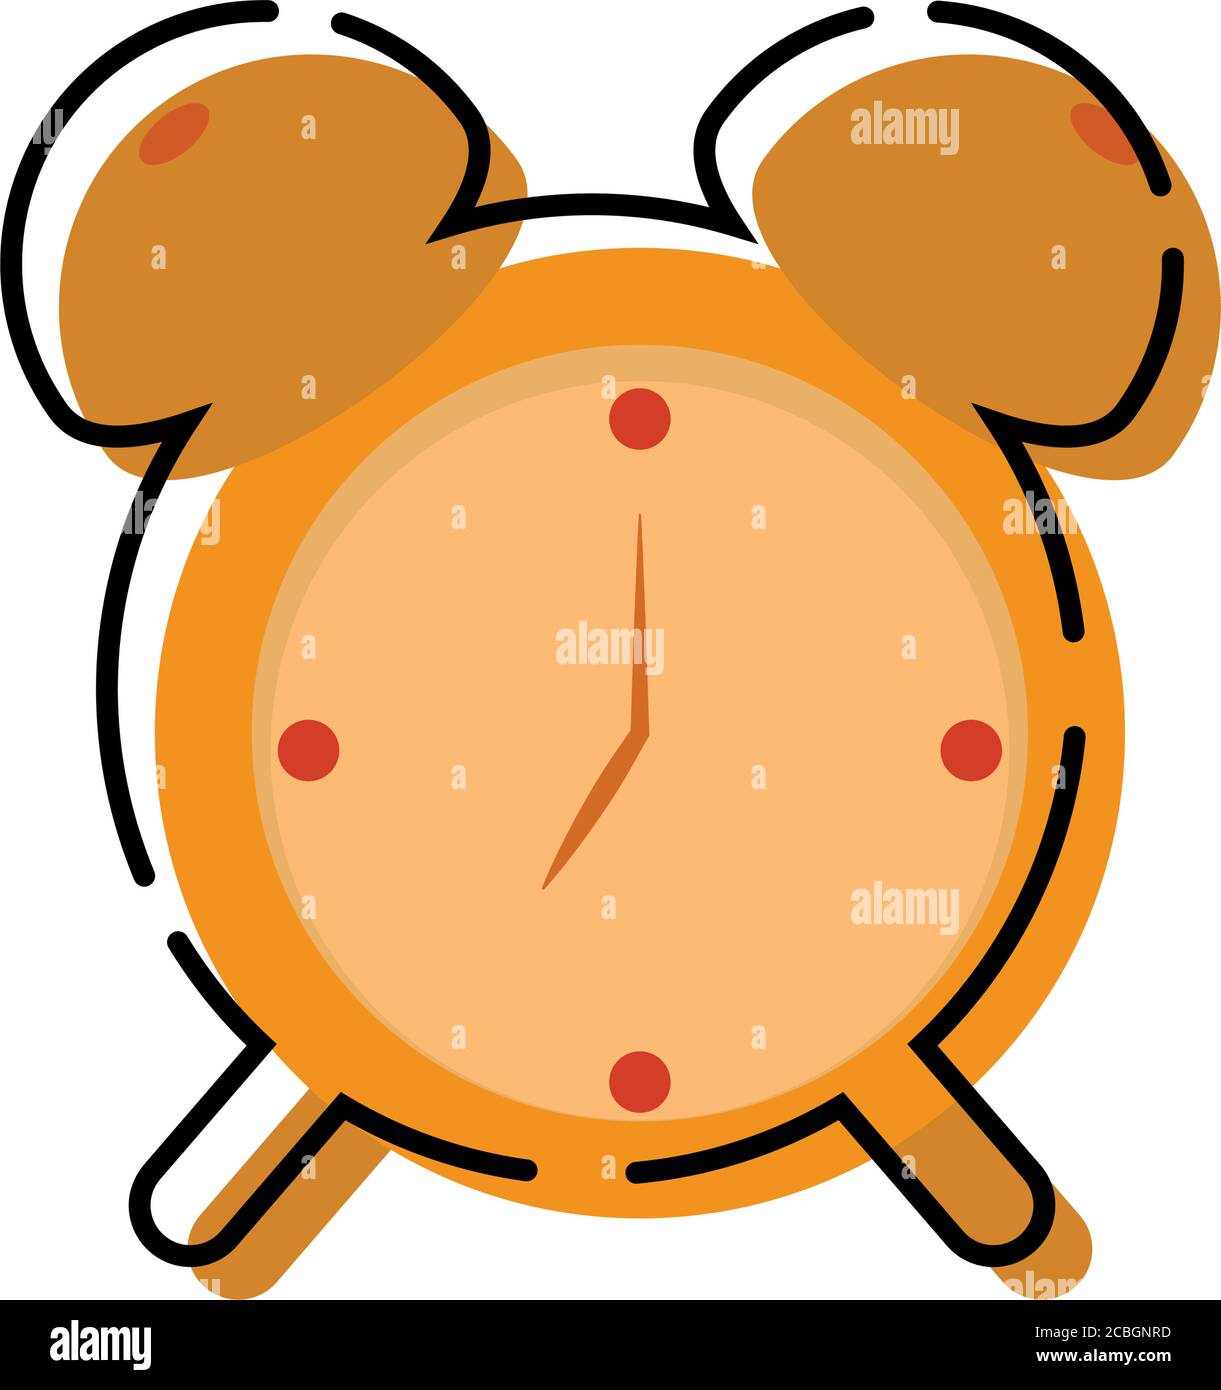 Isolated ornage alarm clock icon Stock Vector